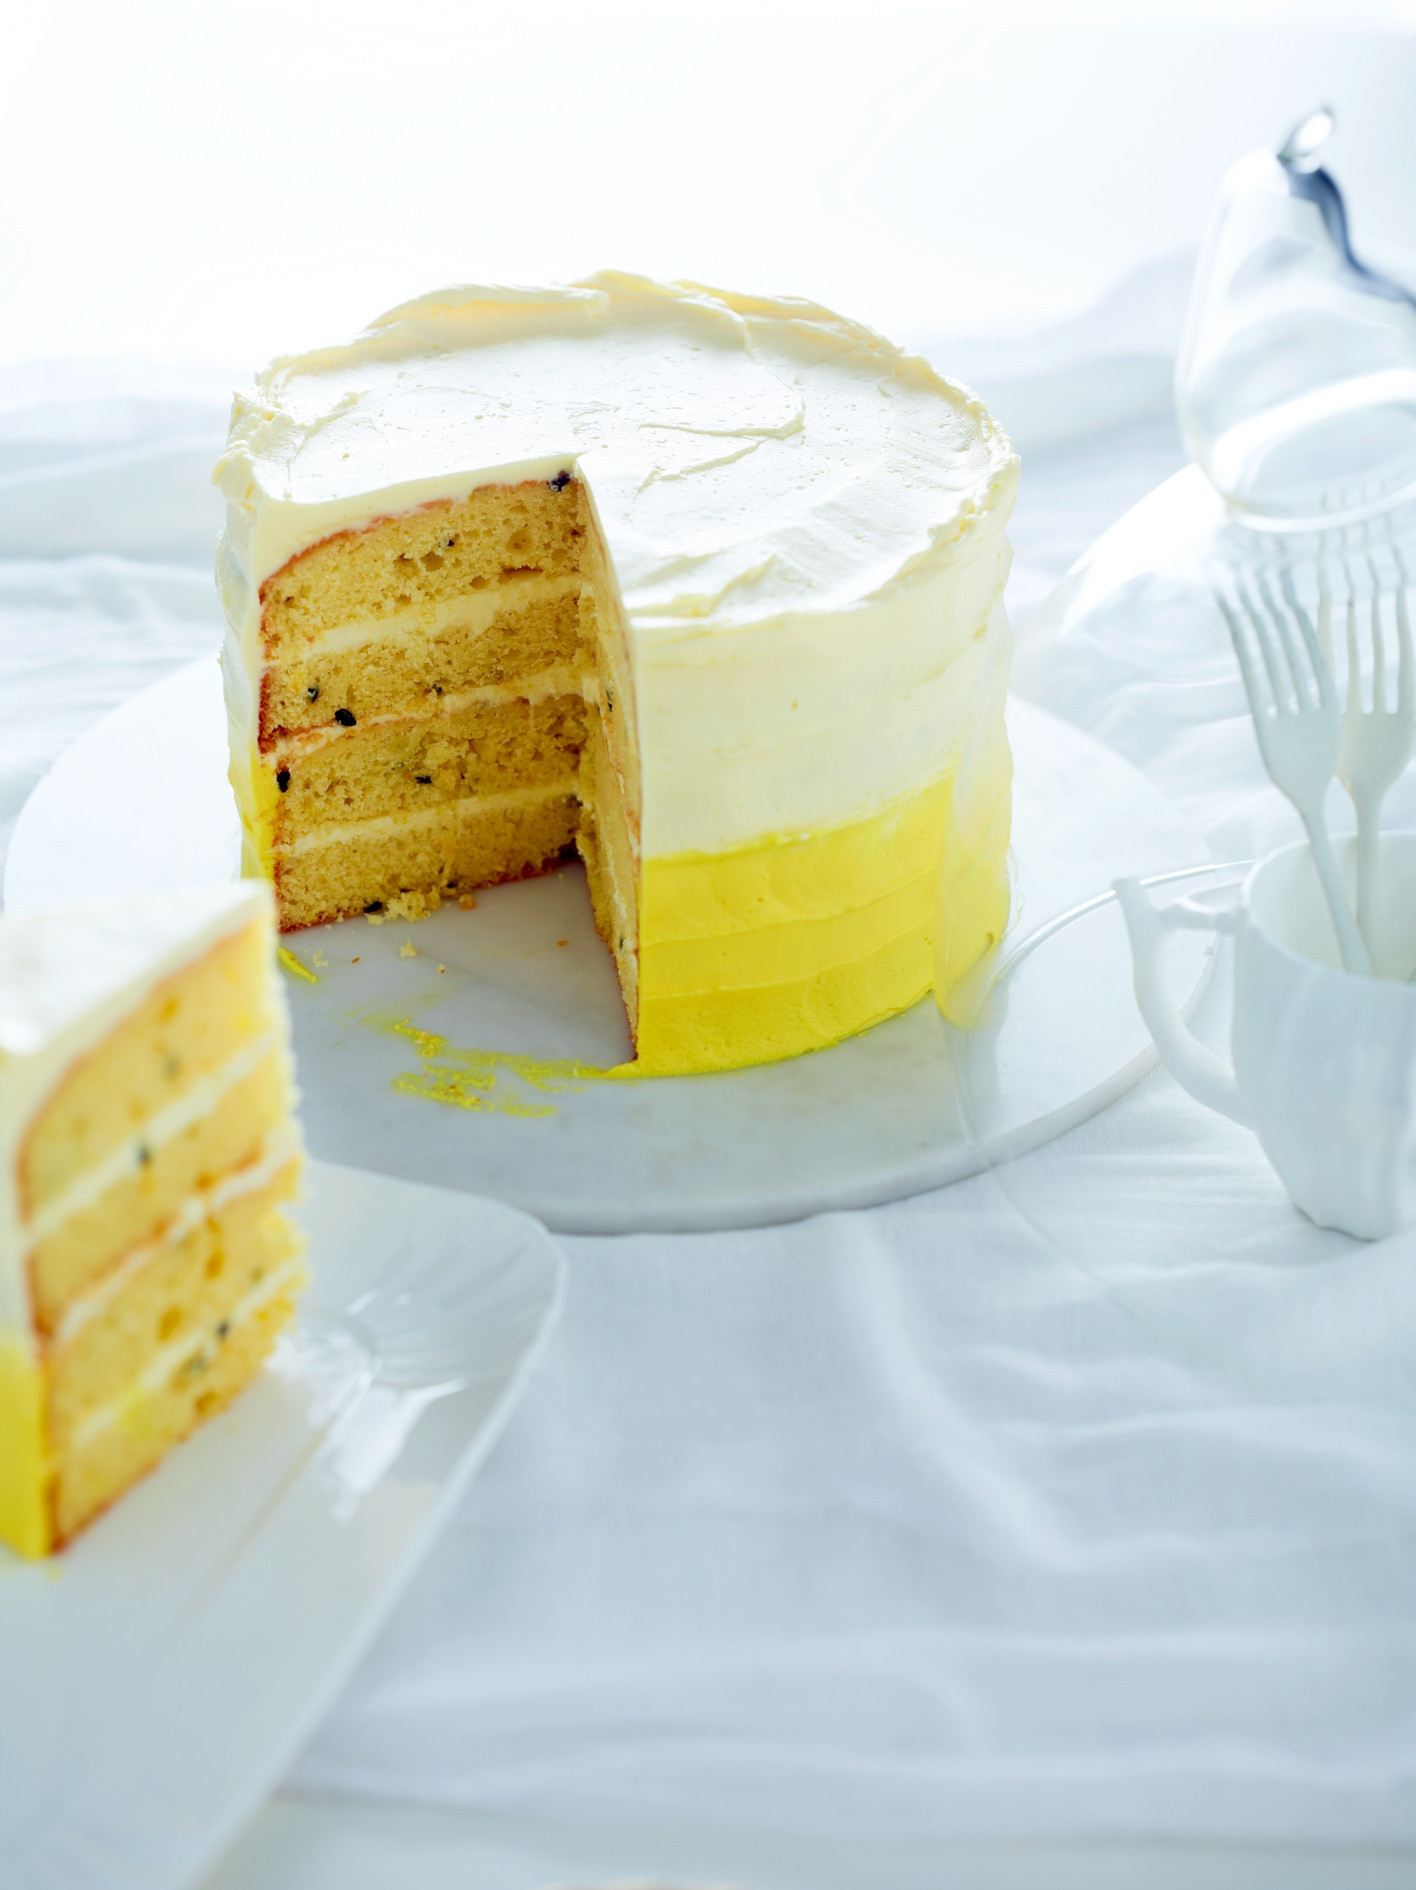 Passion Fruit Cake Recipes
 Passionfruit layer cake with cream cheese frosting recipe